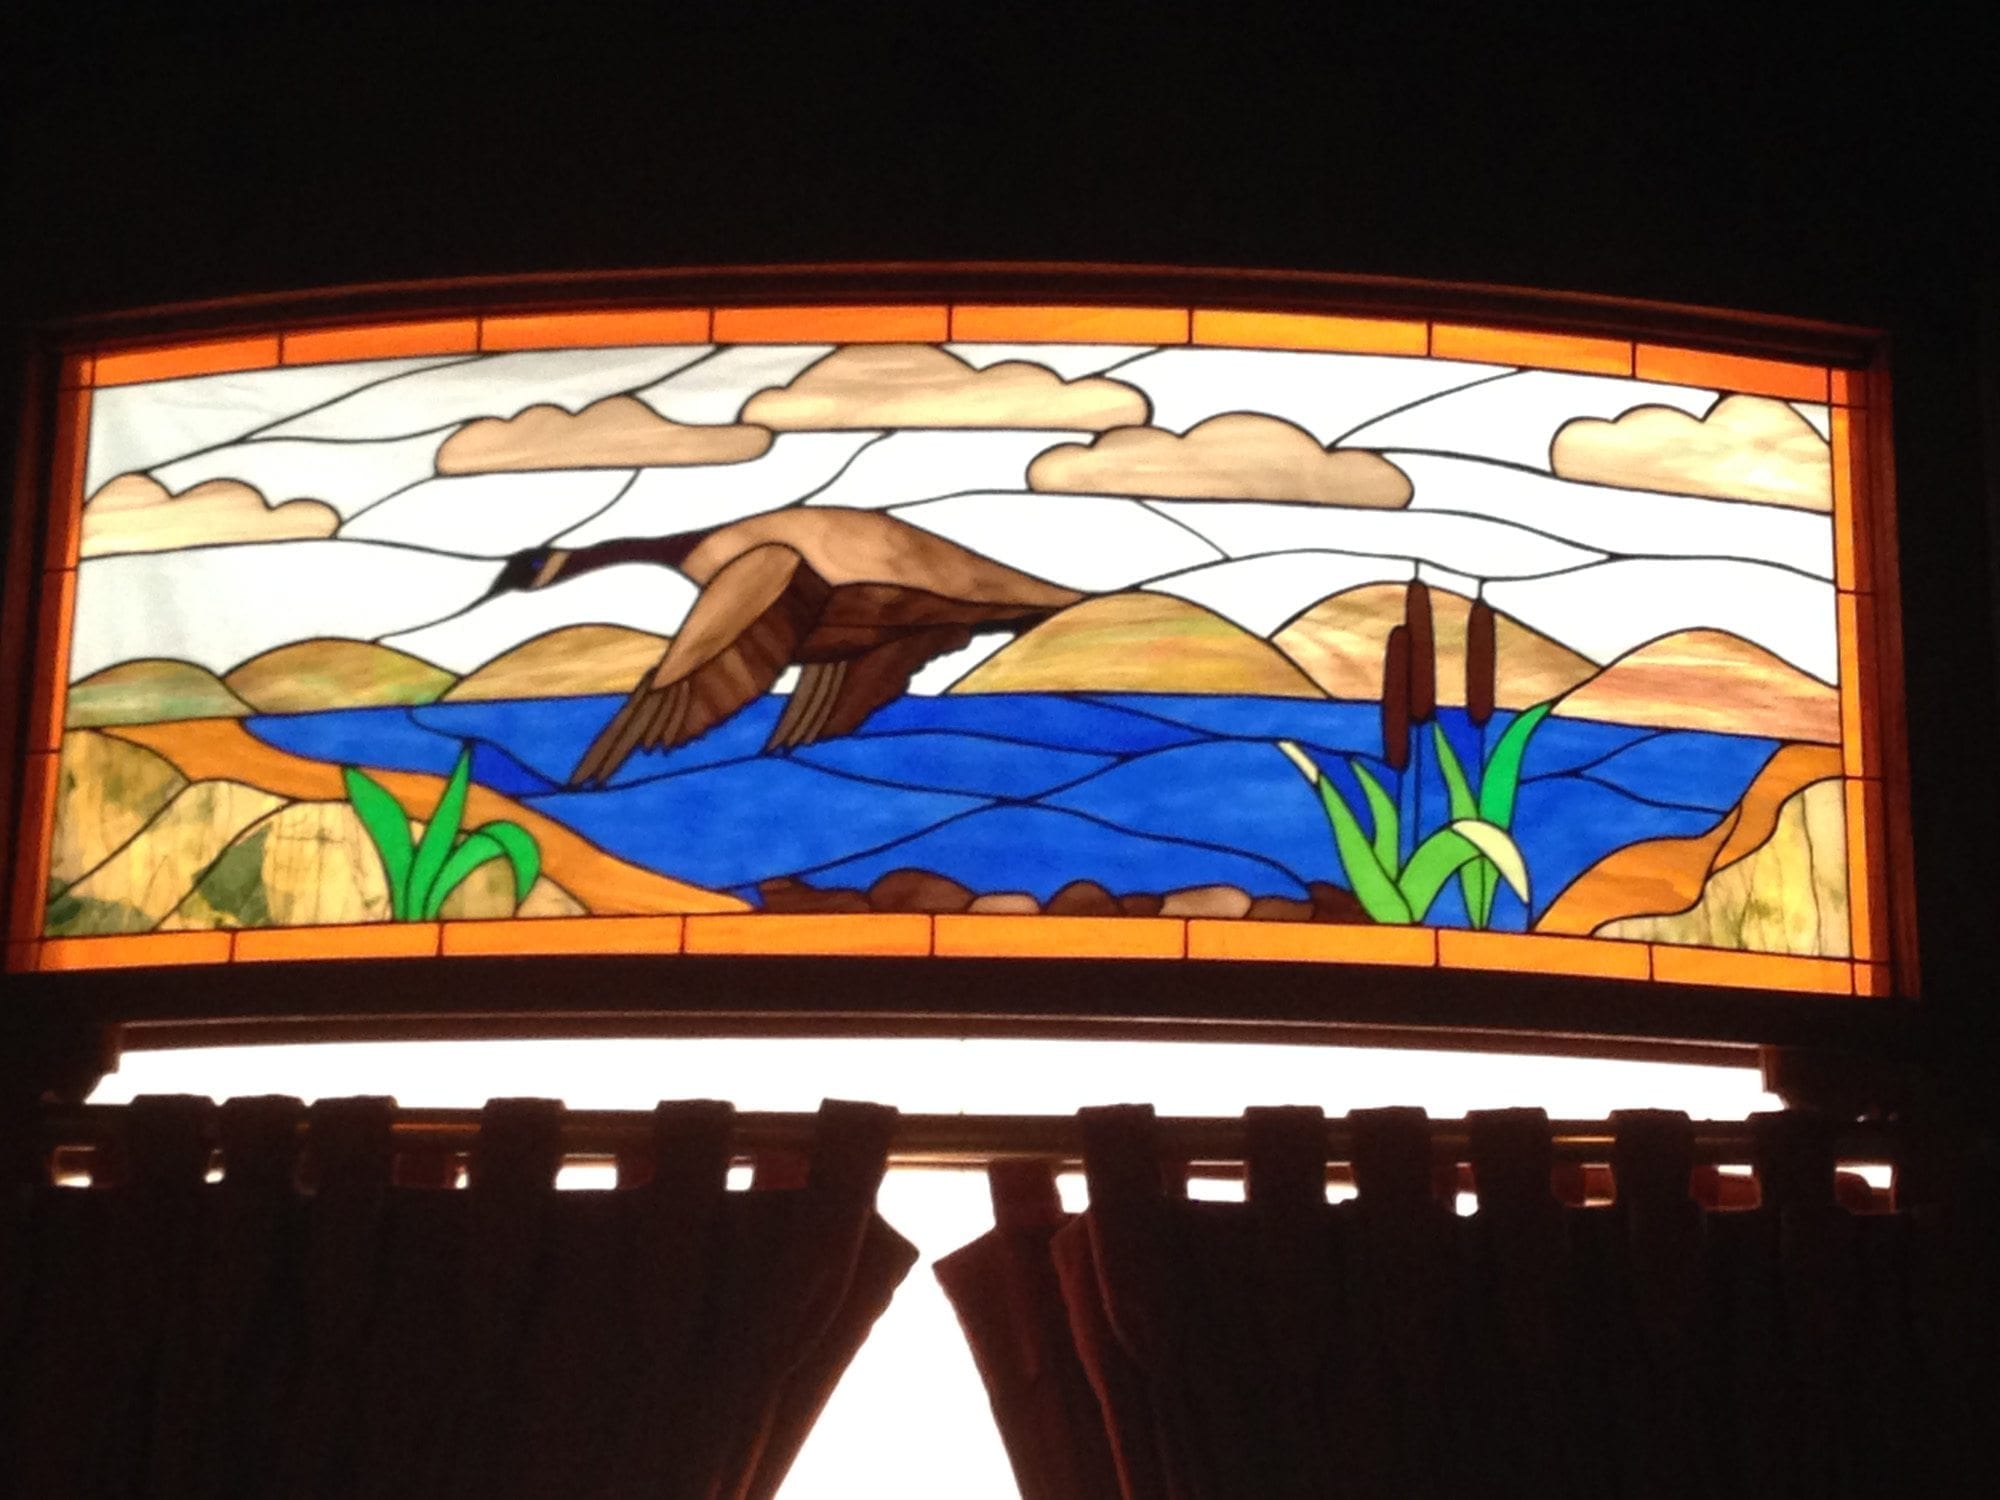 Stained glass depicting a Canadian goose flying over a lake